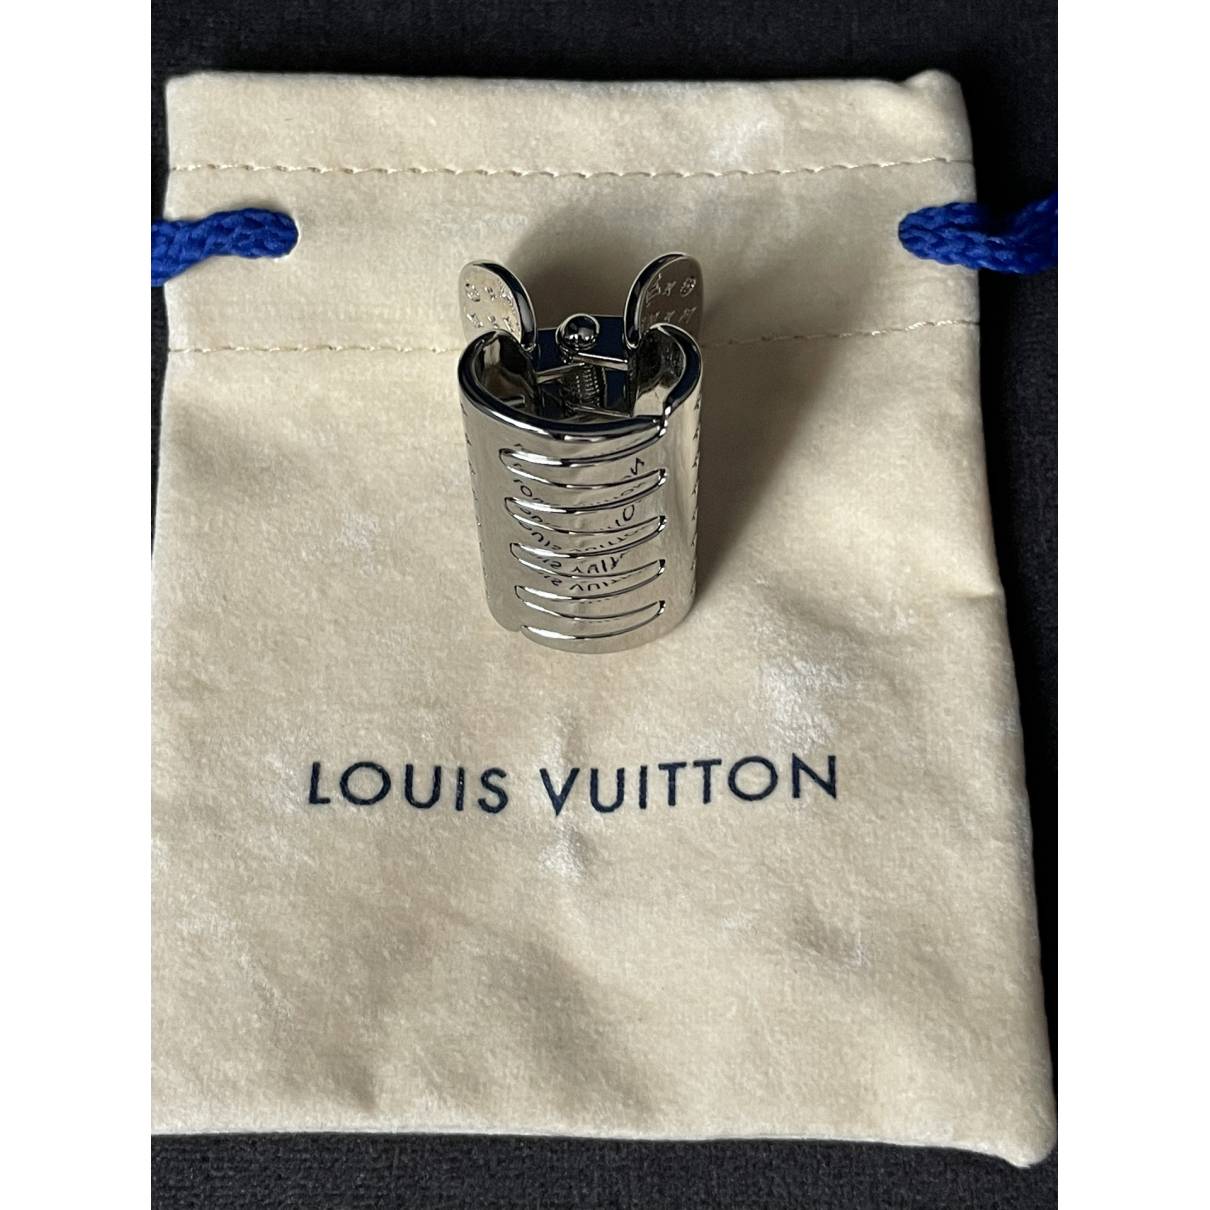 Louis Vuitton - Authenticated Nanogram Hair Accessories - Metal Silver For Woman, Never Worn